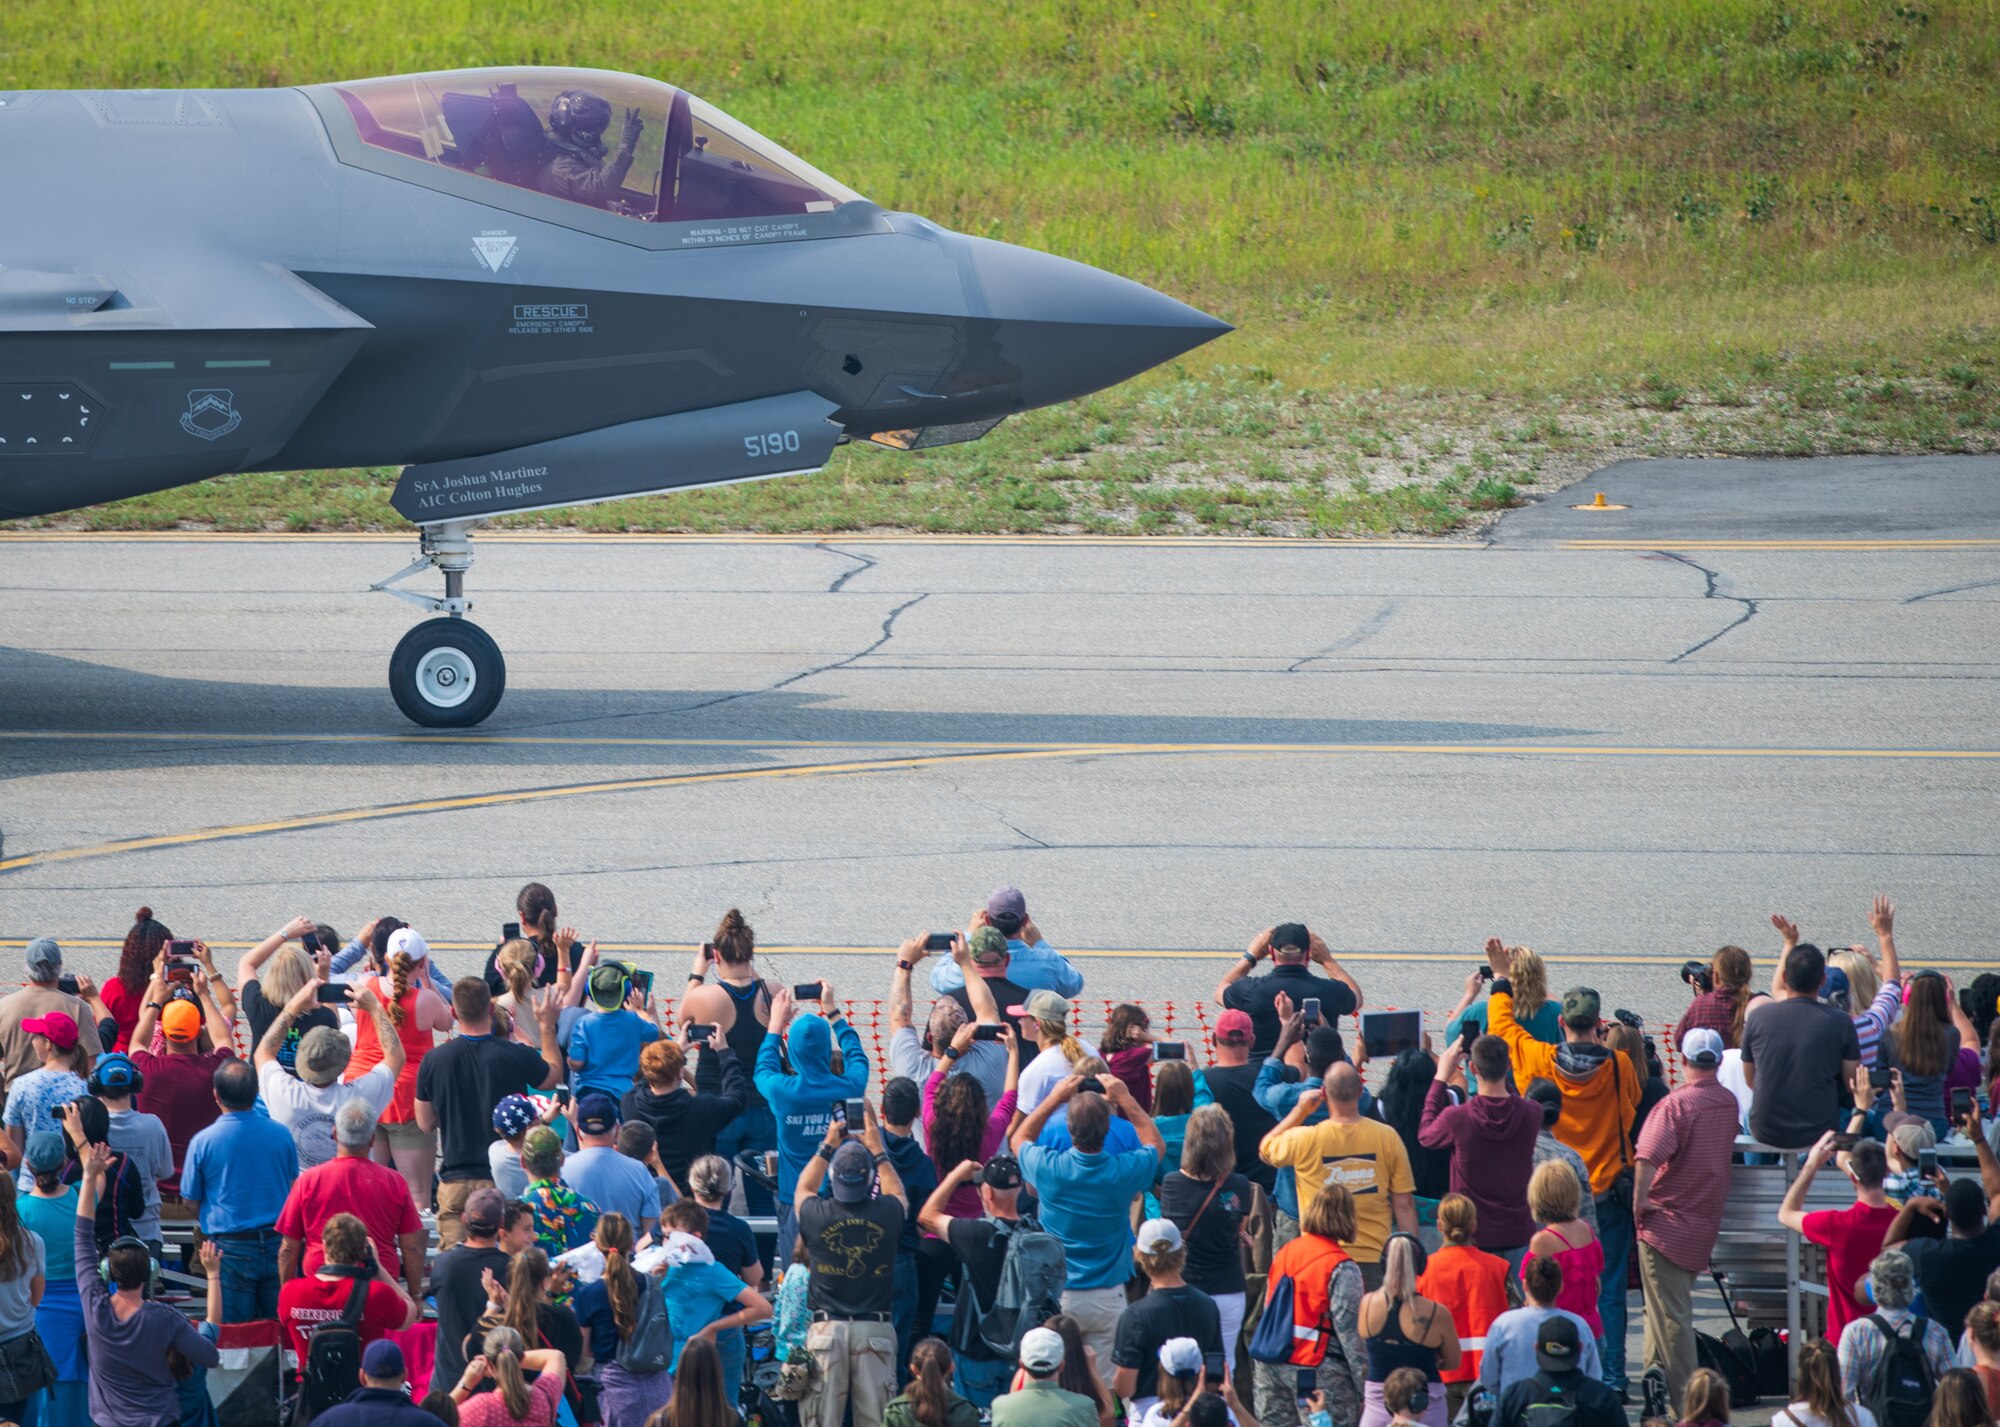 Airshow spectators wave as Capt. Andrew “Dojo” Olson, F-35 Demonstration Team pilot and commander returns from performing an aerial demonstration during the Arctic Lightning Airshow July 13, 2019, at Eielson Air Force Base, Alaska. Spectators got an up-close look at the Air Force’s newest fighter jet marking the airshow since 2008. (U.S. Air Force photo by Senior Airman Alexander Cook)